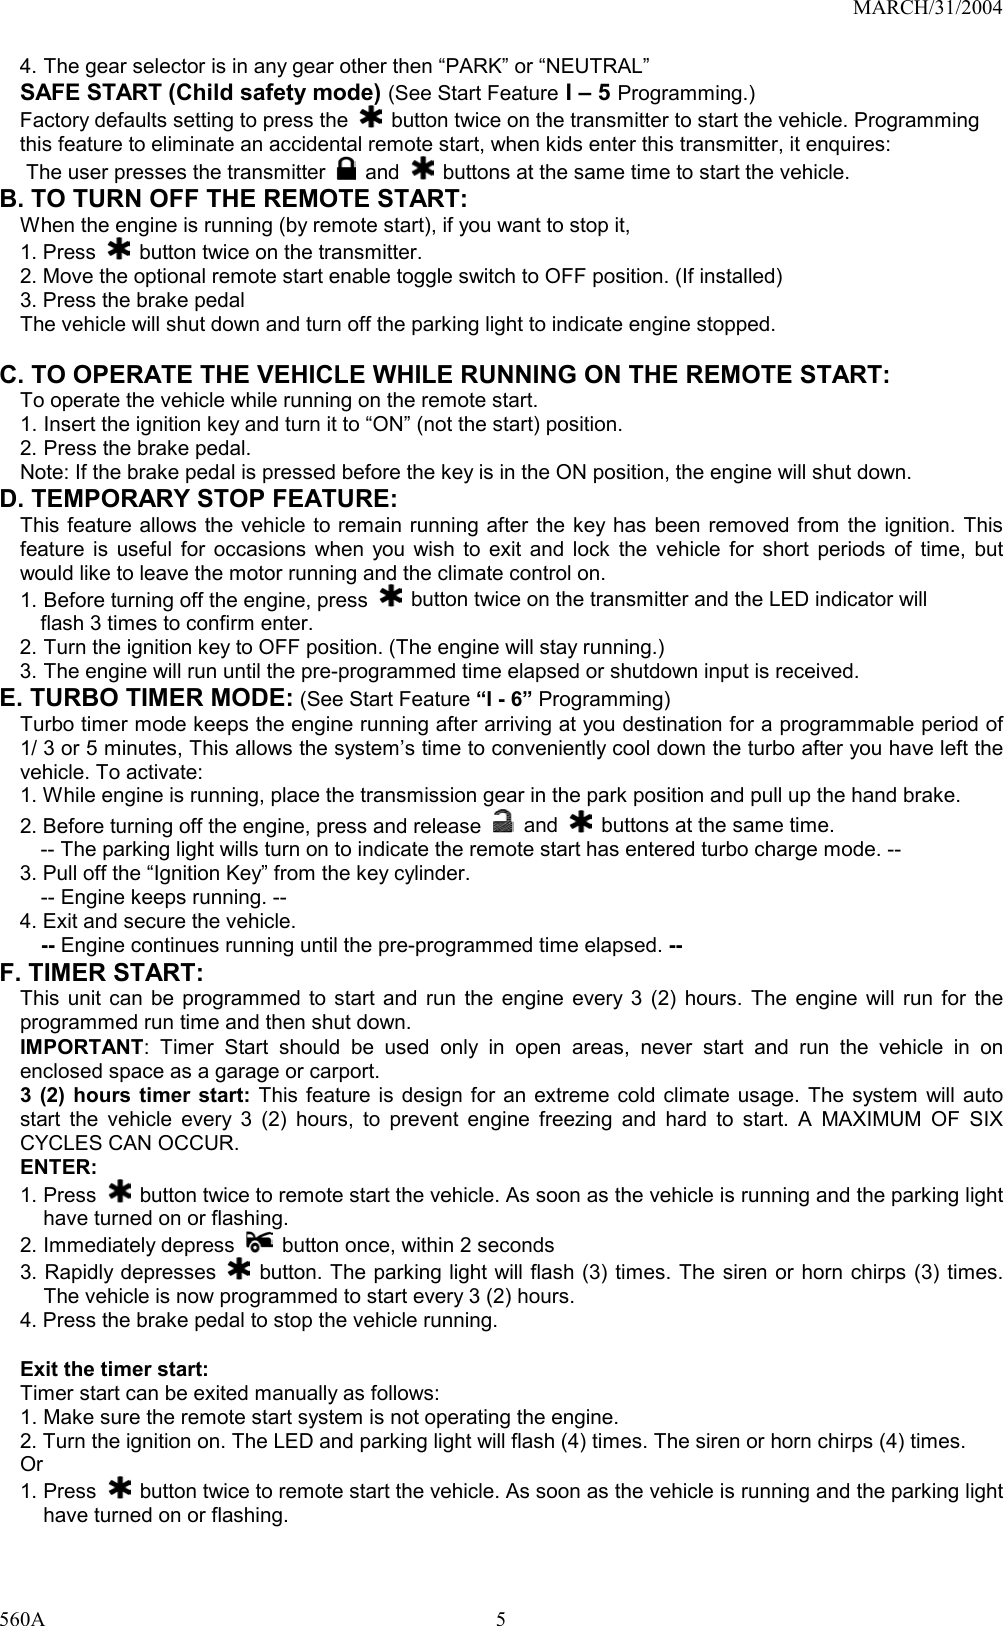 MARCH/31/2004 560A 54. The gear selector is in any gear other then “PARK” or “NEUTRAL” SAFE START (Child safety mode) (See Start Feature I – 5 Programming.) Factory defaults setting to press the    button twice on the transmitter to start the vehicle. Programming this feature to eliminate an accidental remote start, when kids enter this transmitter, it enquires: The user presses the transmitter   and    buttons at the same time to start the vehicle.   B. TO TURN OFF THE REMOTE START: When the engine is running (by remote start), if you want to stop it,   1. Press    button twice on the transmitter. 2. Move the optional remote start enable toggle switch to OFF position. (If installed) 3. Press the brake pedal   The vehicle will shut down and turn off the parking light to indicate engine stopped.  C. TO OPERATE THE VEHICLE WHILE RUNNING ON THE REMOTE START: To operate the vehicle while running on the remote start. 1. Insert the ignition key and turn it to “ON” (not the start) position. 2. Press the brake pedal. Note: If the brake pedal is pressed before the key is in the ON position, the engine will shut down. D. TEMPORARY STOP FEATURE: This feature allows the vehicle to remain running after the key has been removed from the ignition. This feature is useful for occasions when you wish to exit and lock the vehicle for short periods of time, but would like to leave the motor running and the climate control on. 1. Before turning off the engine, press   button twice on the transmitter and the LED indicator will       flash 3 times to confirm enter. 2. Turn the ignition key to OFF position. (The engine will stay running.) 3. The engine will run until the pre-programmed time elapsed or shutdown input is received. E. TURBO TIMER MODE: (See Start Feature “I - 6” Programming) Turbo timer mode keeps the engine running after arriving at you destination for a programmable period of 1/ 3 or 5 minutes, This allows the system’s time to conveniently cool down the turbo after you have left the vehicle. To activate: 1. While engine is running, place the transmission gear in the park position and pull up the hand brake. 2. Before turning off the engine, press and release   and    buttons at the same time. -- The parking light wills turn on to indicate the remote start has entered turbo charge mode. -- 3. Pull off the “Ignition Key” from the key cylinder.   -- Engine keeps running. -- 4. Exit and secure the vehicle.   -- Engine continues running until the pre-programmed time elapsed. -- F. TIMER START:   This unit can be programmed to start and run the engine every 3 (2) hours. The engine will run for the programmed run time and then shut down. IMPORTANT: Timer Start should be used only in open areas, never start and run the vehicle in on enclosed space as a garage or carport. 3 (2) hours timer start: This feature is design for an extreme cold climate usage. The system will auto start the vehicle every 3 (2) hours, to prevent engine freezing and hard to start. A MAXIMUM OF SIX CYCLES CAN OCCUR.   ENTER: 1. Press   button twice to remote start the vehicle. As soon as the vehicle is running and the parking light have turned on or flashing. 2. Immediately depress    button once, within 2 seconds 3. Rapidly depresses   button. The parking light will flash (3) times. The siren or horn chirps (3) times. The vehicle is now programmed to start every 3 (2) hours. 4. Press the brake pedal to stop the vehicle running.  Exit the timer start: Timer start can be exited manually as follows: 1. Make sure the remote start system is not operating the engine. 2. Turn the ignition on. The LED and parking light will flash (4) times. The siren or horn chirps (4) times.   Or 1. Press    button twice to remote start the vehicle. As soon as the vehicle is running and the parking light have turned on or flashing. 